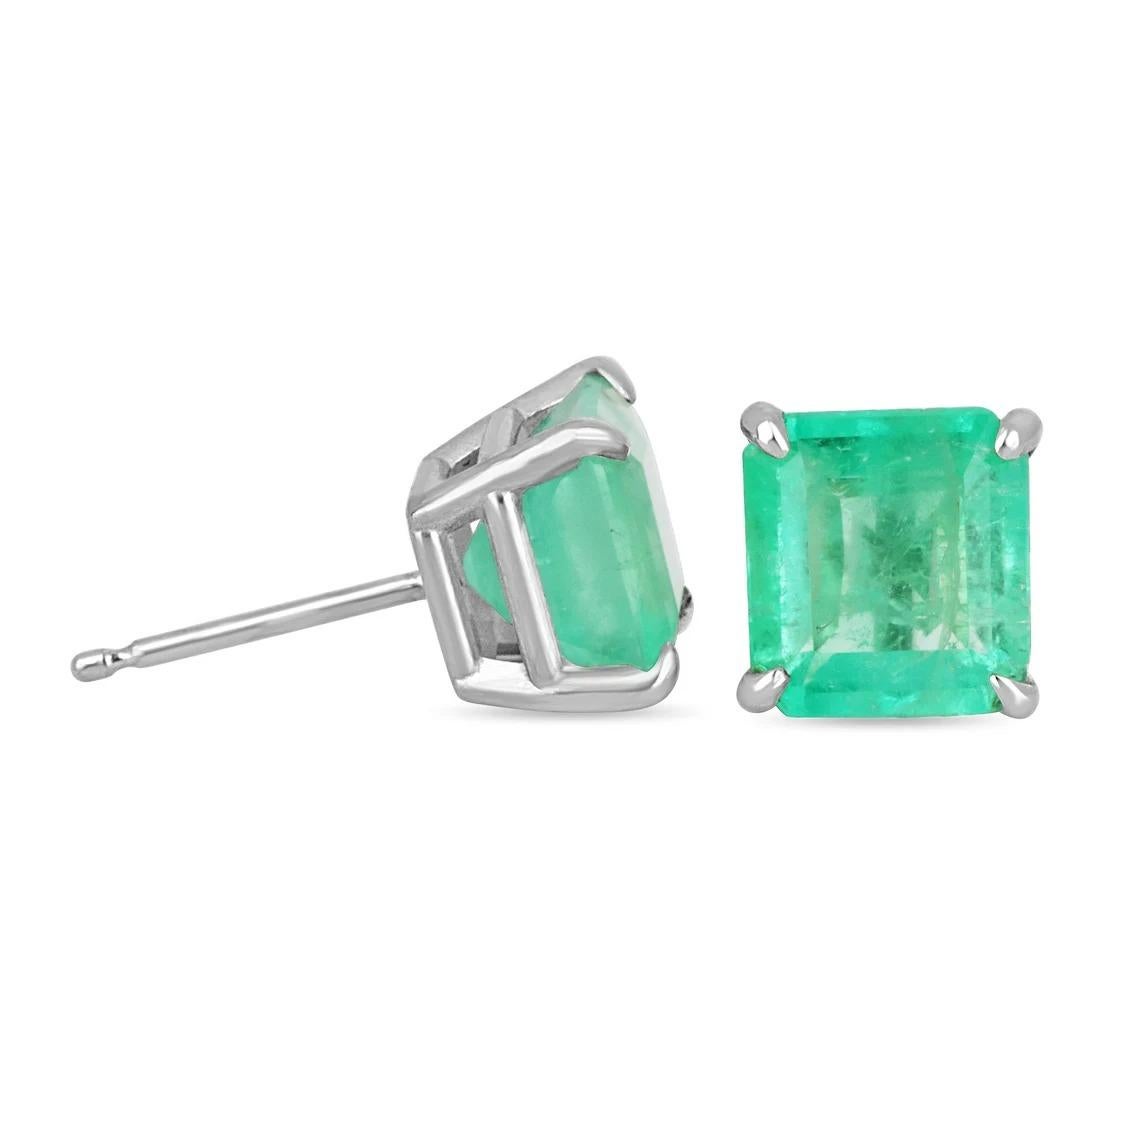 A classic pair of Asscher-cut green natural Colombian emerald gold studs 14K Gold. These earrings feature two lively, natural Colombian emeralds that are handset in a single four-prong setting. These stones were sourced by the best emerald mine in